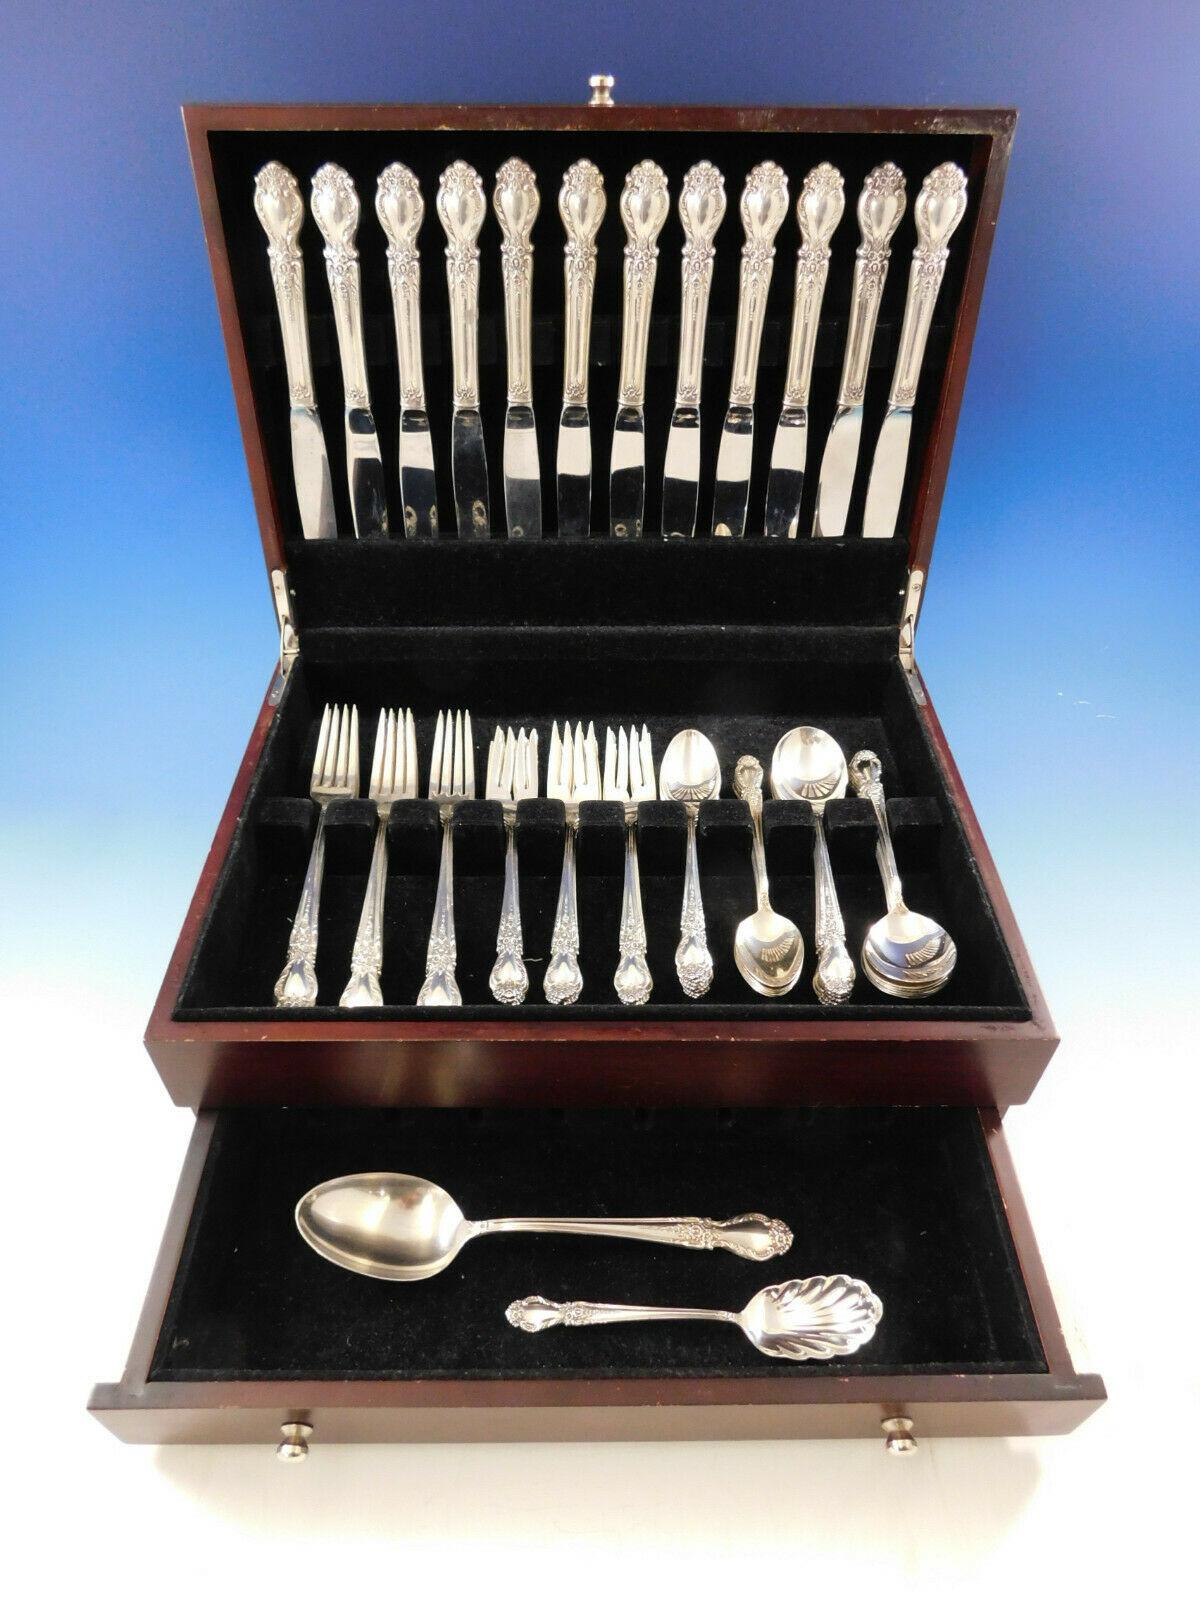 Dinner Size Brocade by International sterling silver flatware set of 62 pieces. This set includes:

12 dinner size knives, 9 1/2